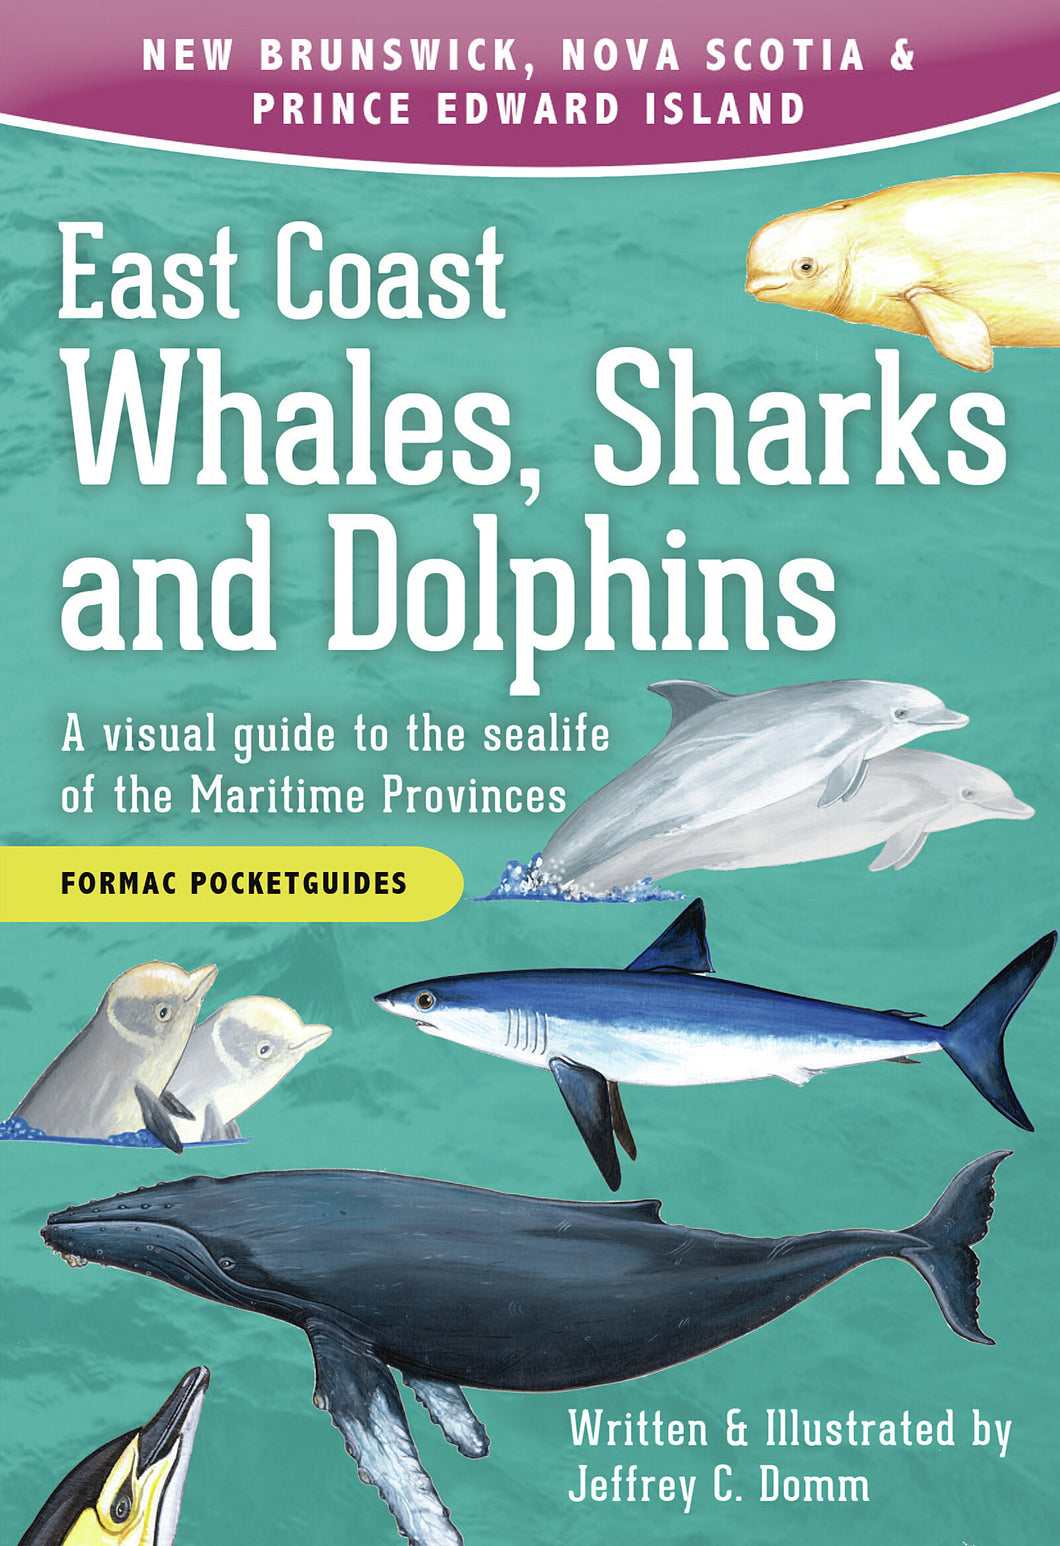 East Coast Whales, Sharks and Dolphins